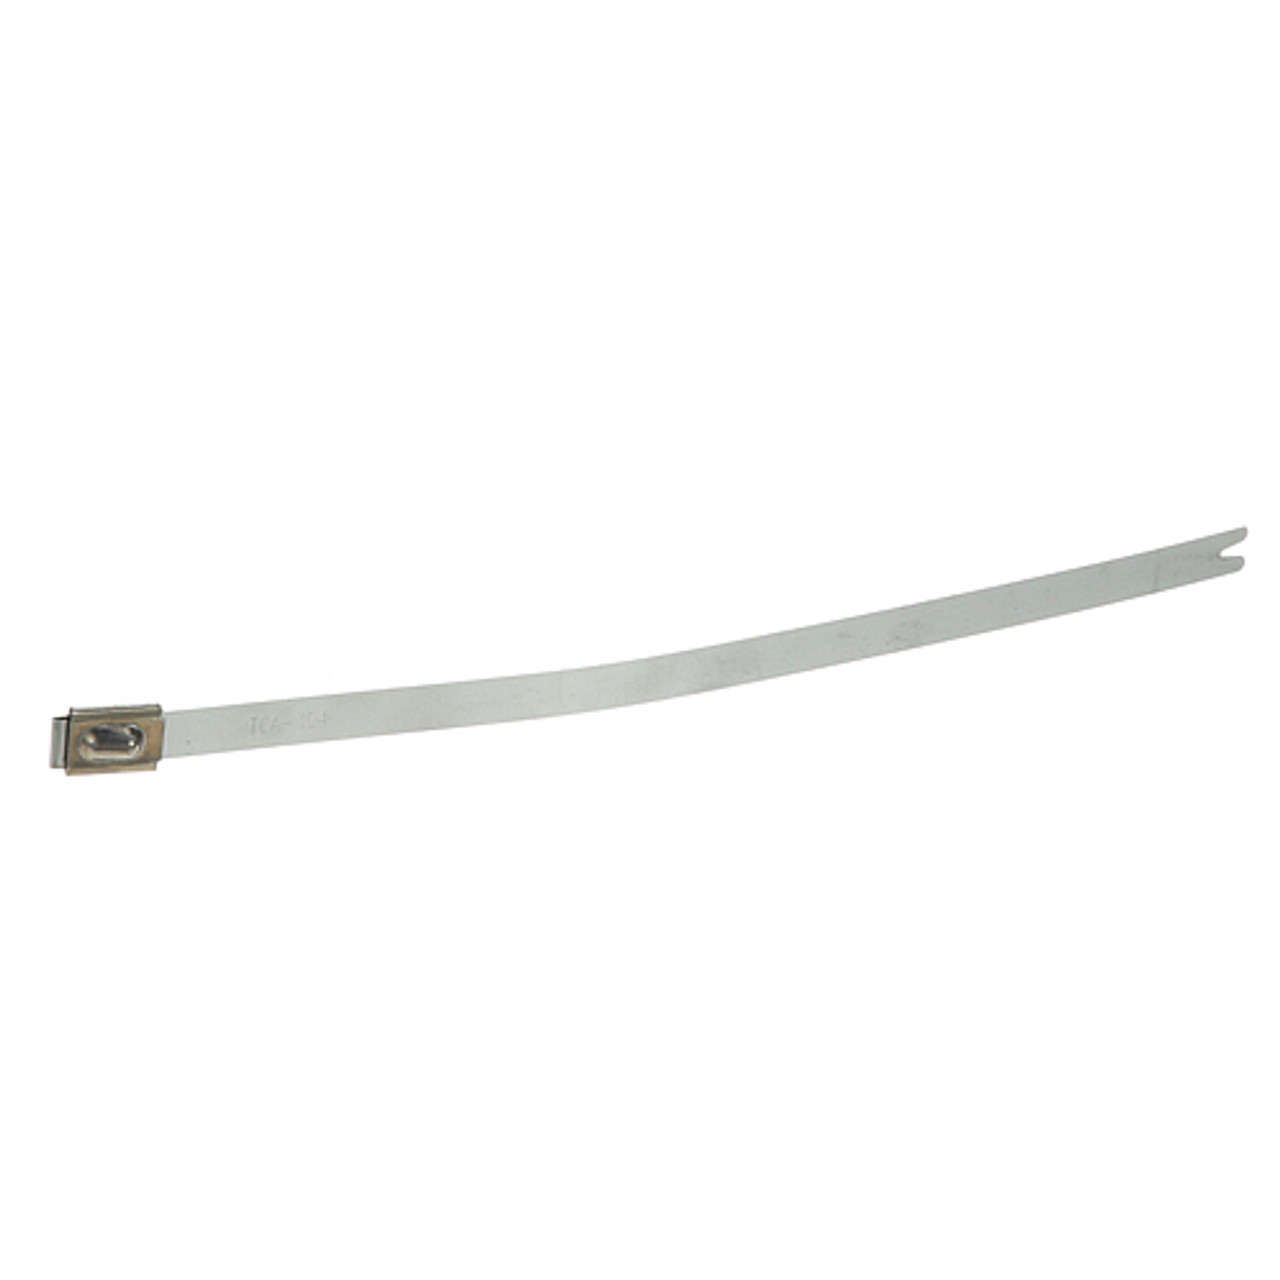 Metal Tie Wrap - Replacement Part For Dean 809-0567